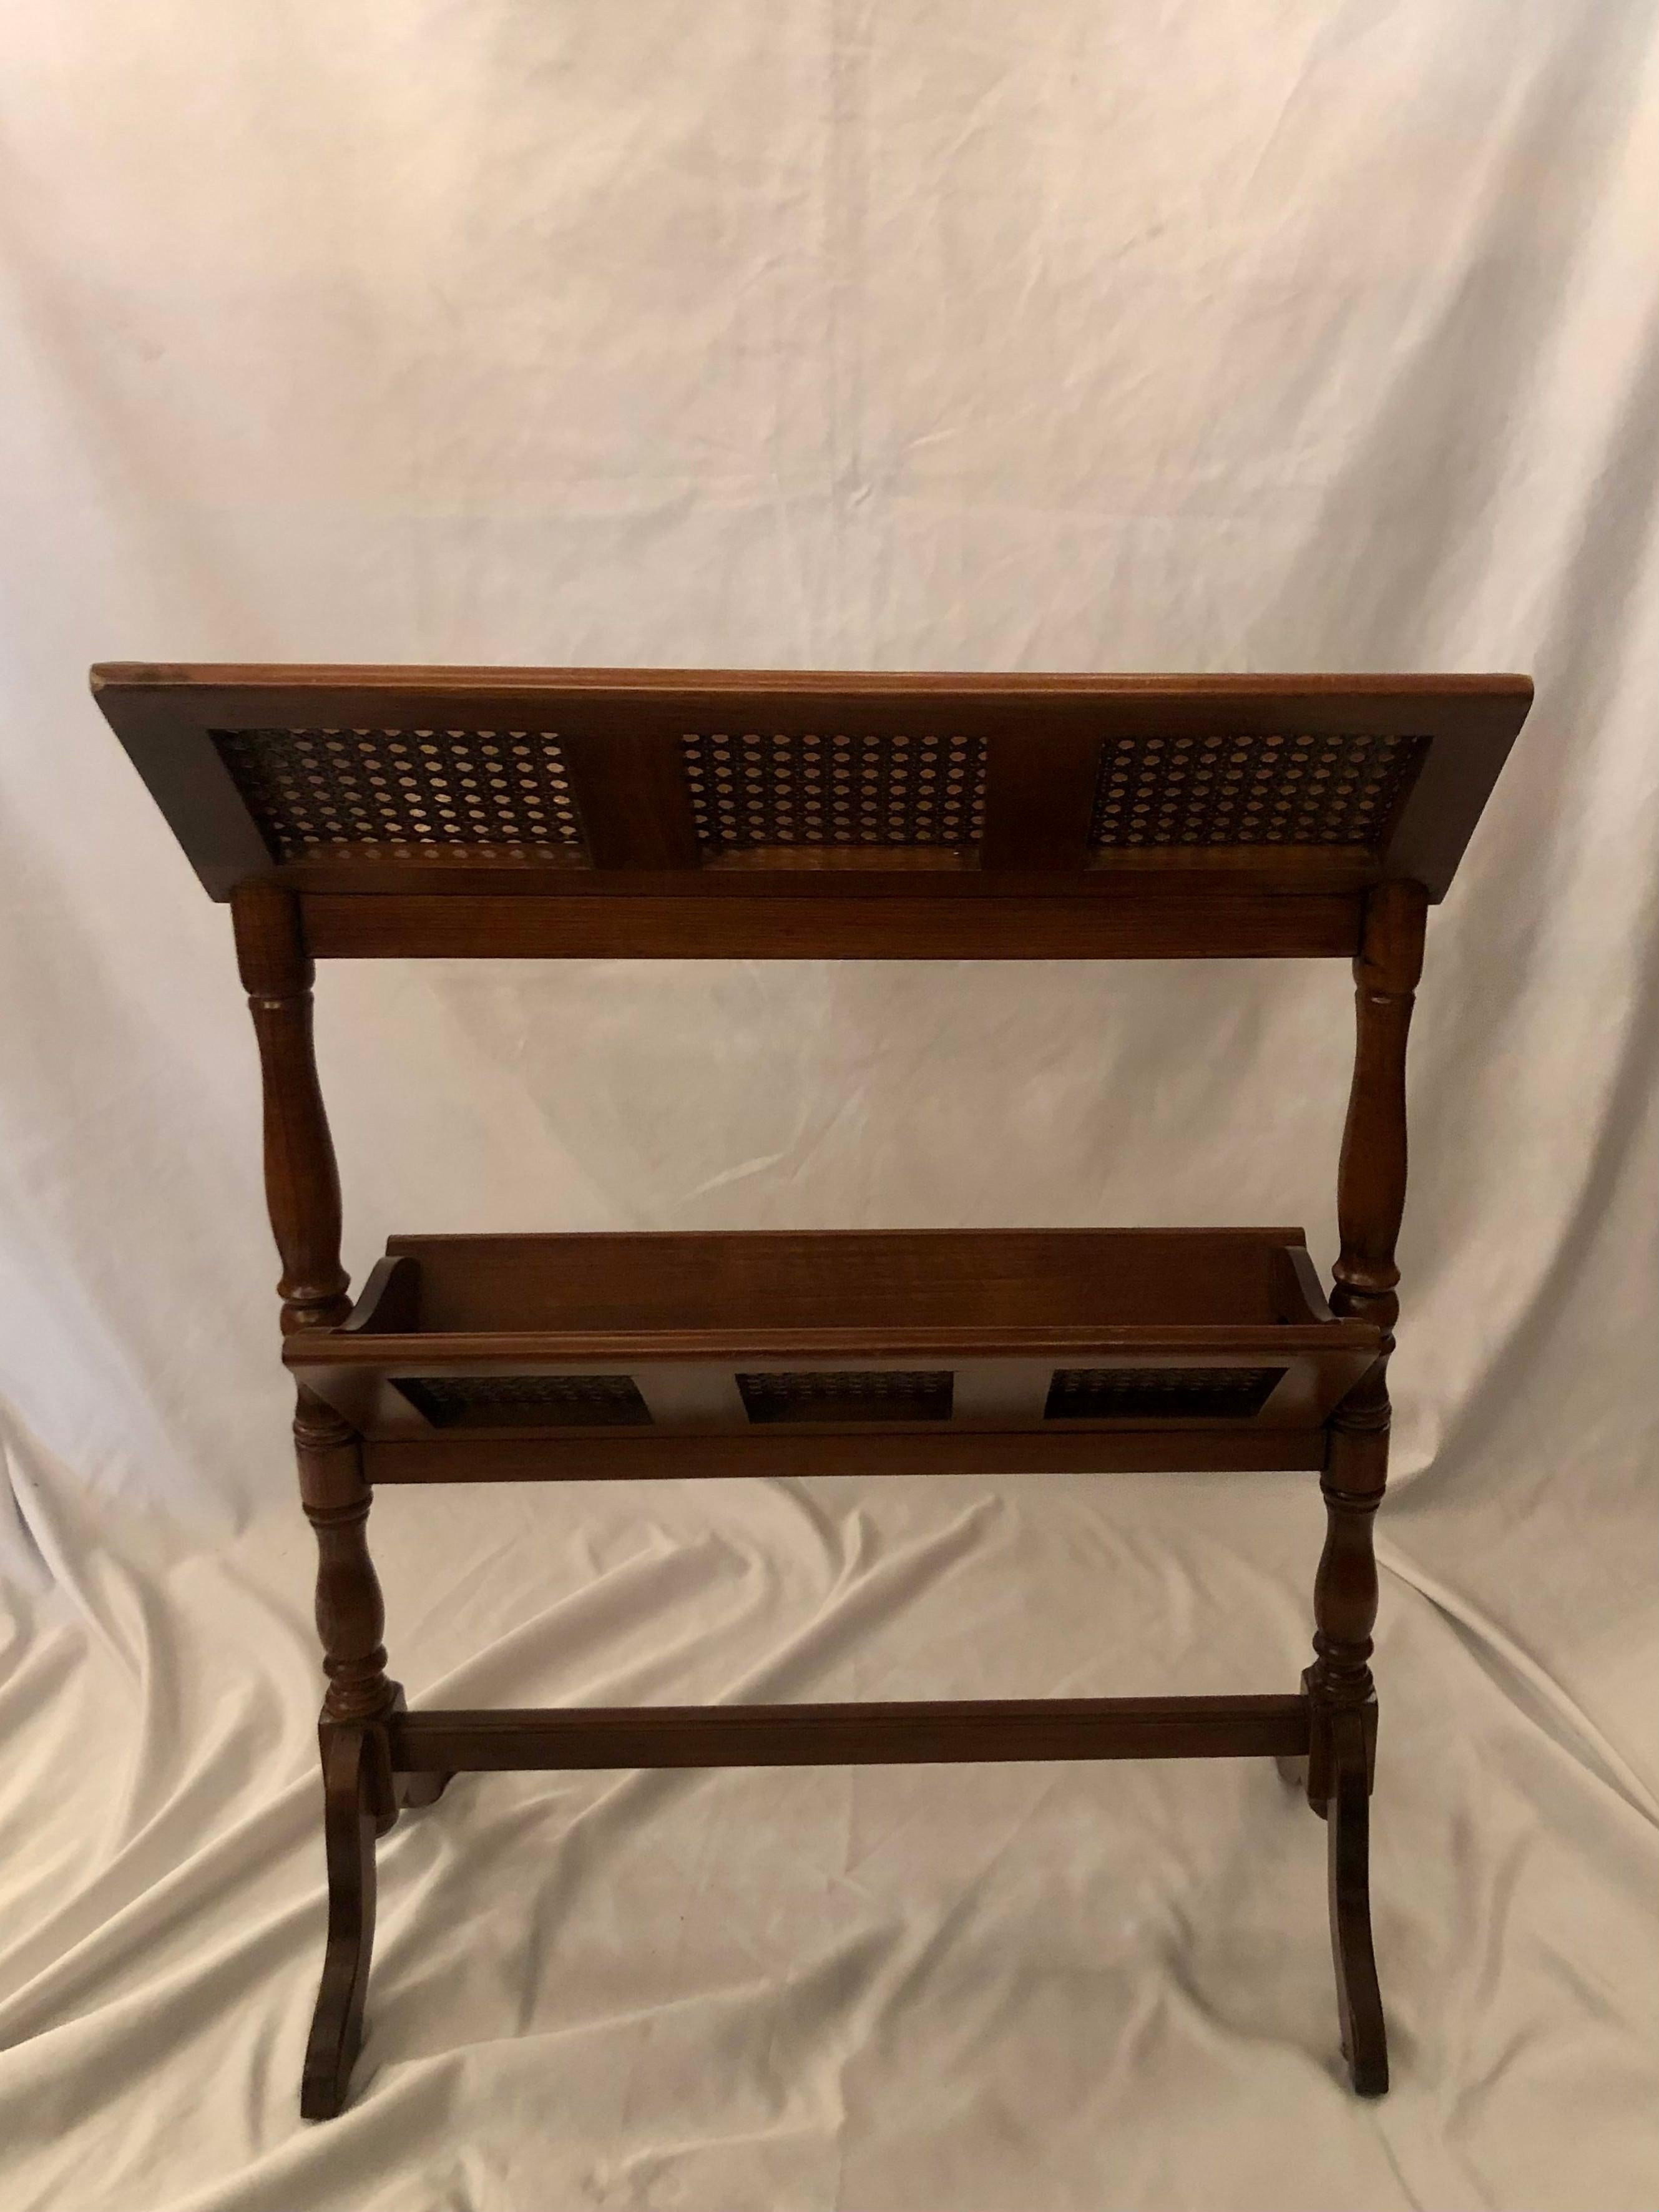 Handmade English Fruitwood 2 Tier Book Trough/Stand with Cane-Inserts 1